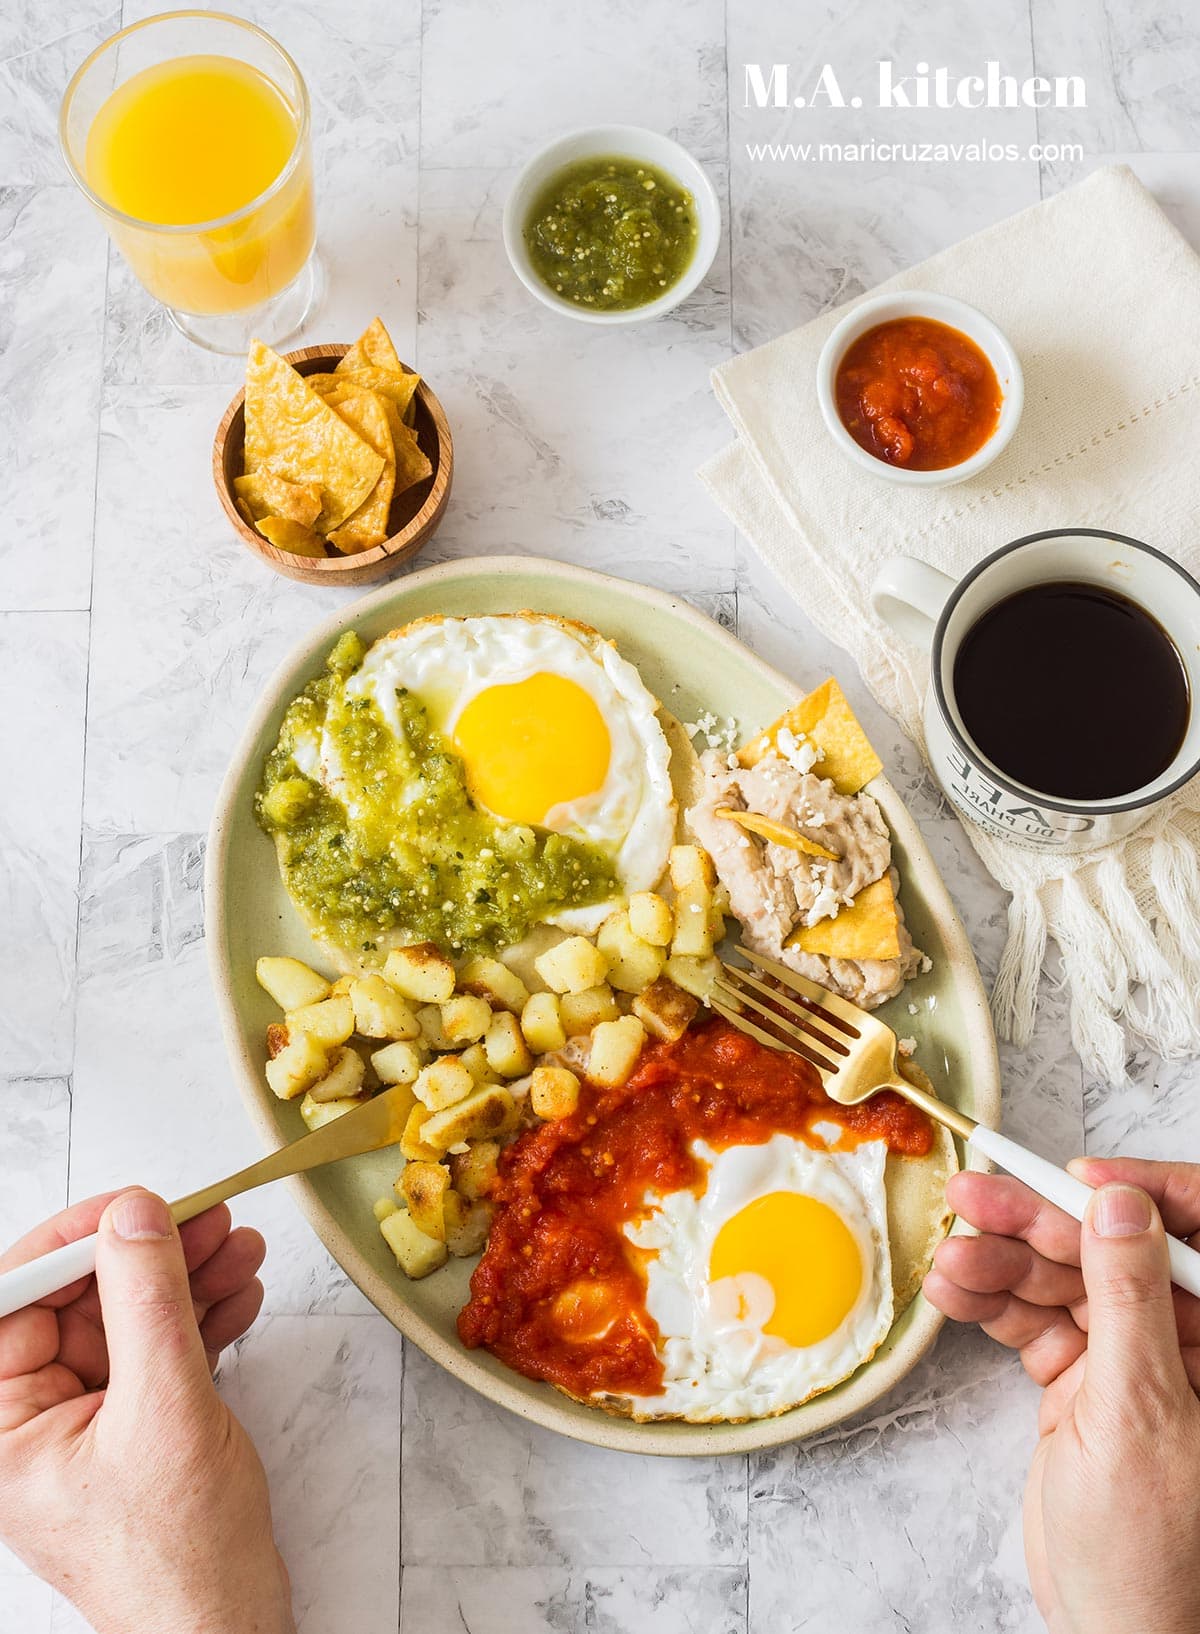 Two man hands with utensils over huevos divorciados served with refried beans and potatoes. Around two bowls with salsas and corn chips, coffee, and orange juice on a glass.